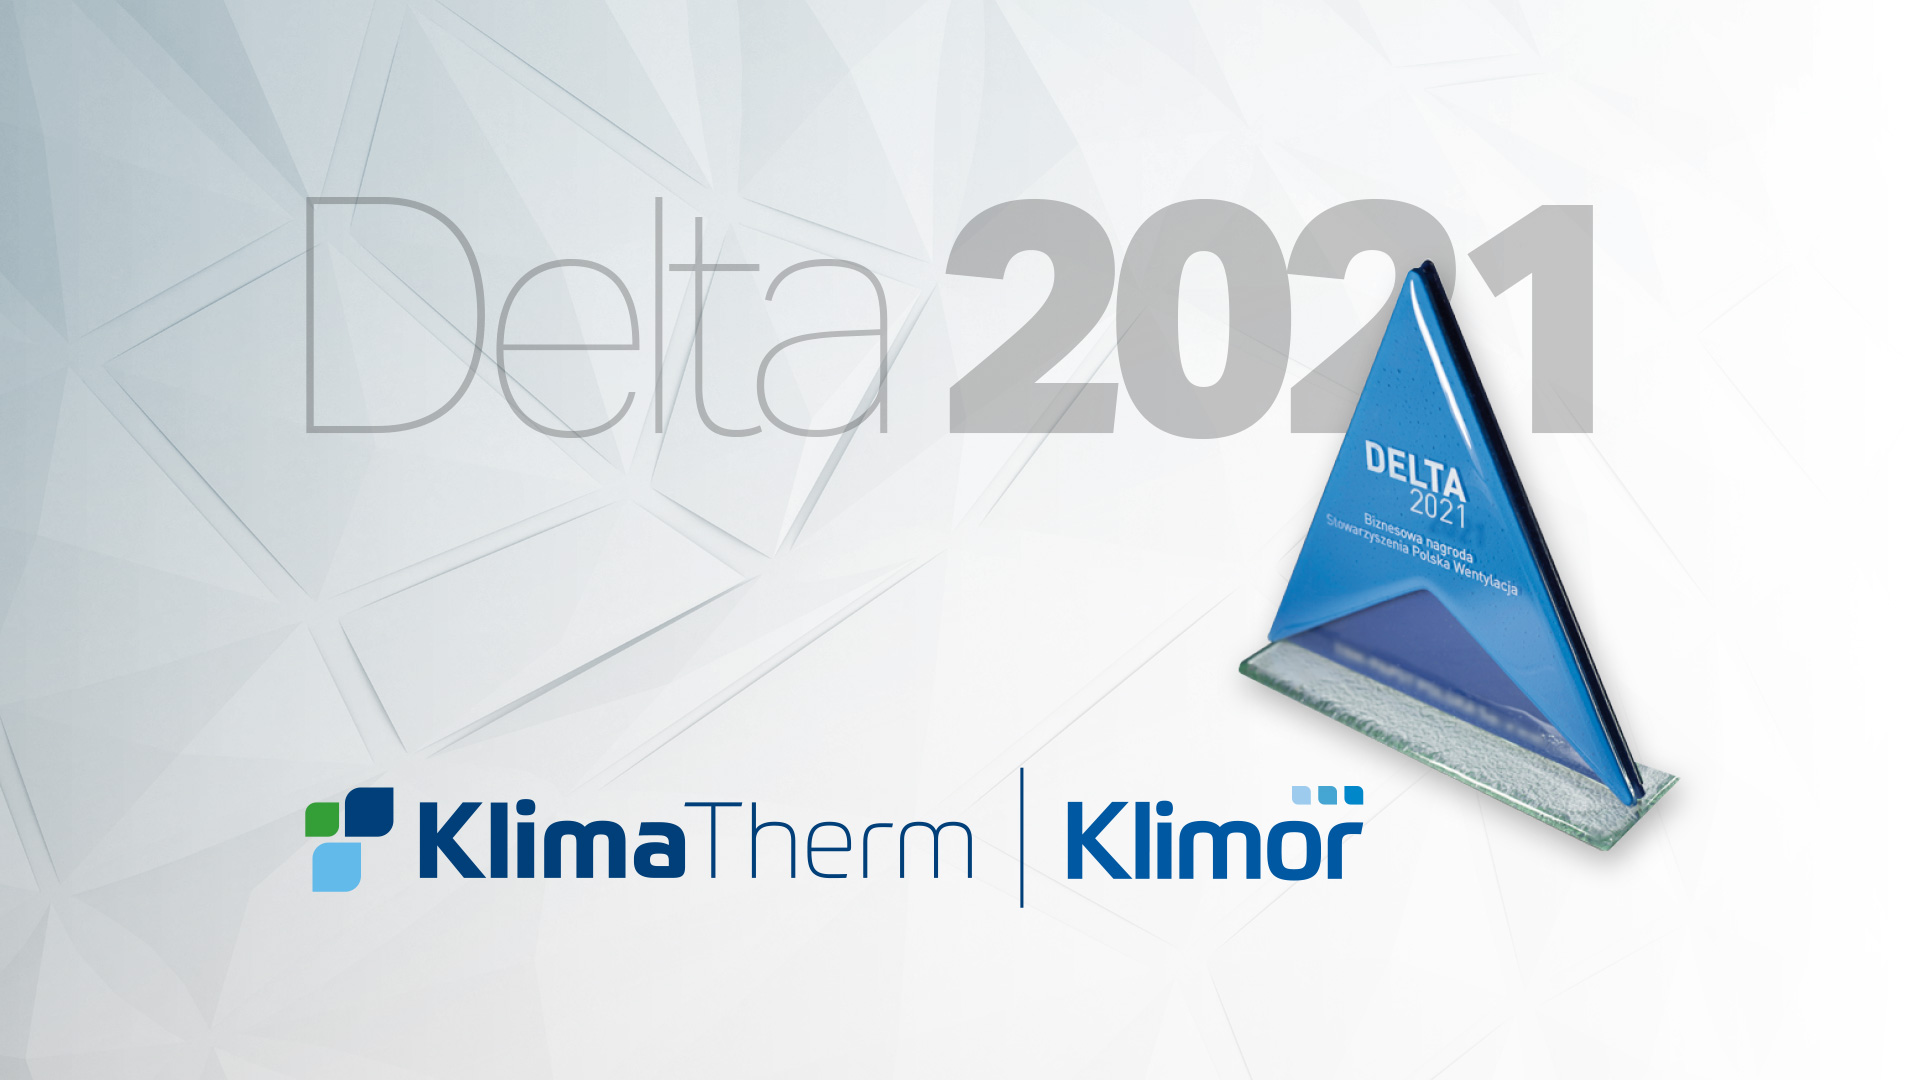 Klima-Therm – a winner of the DELTA 2021 award